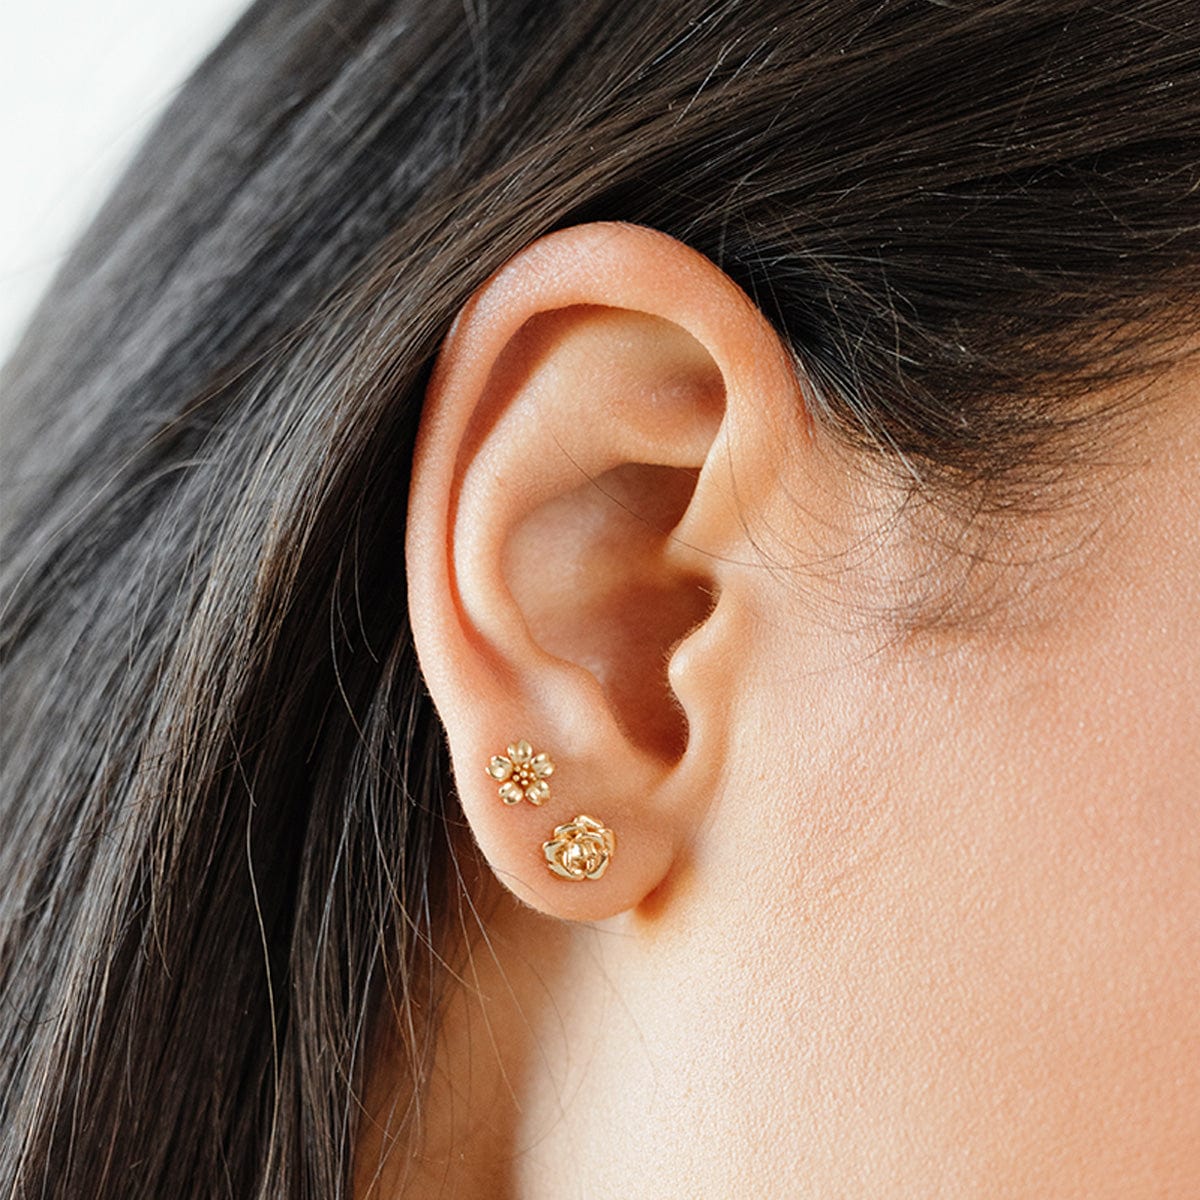 Tiny Birth Flower Stud Earrings in Gold